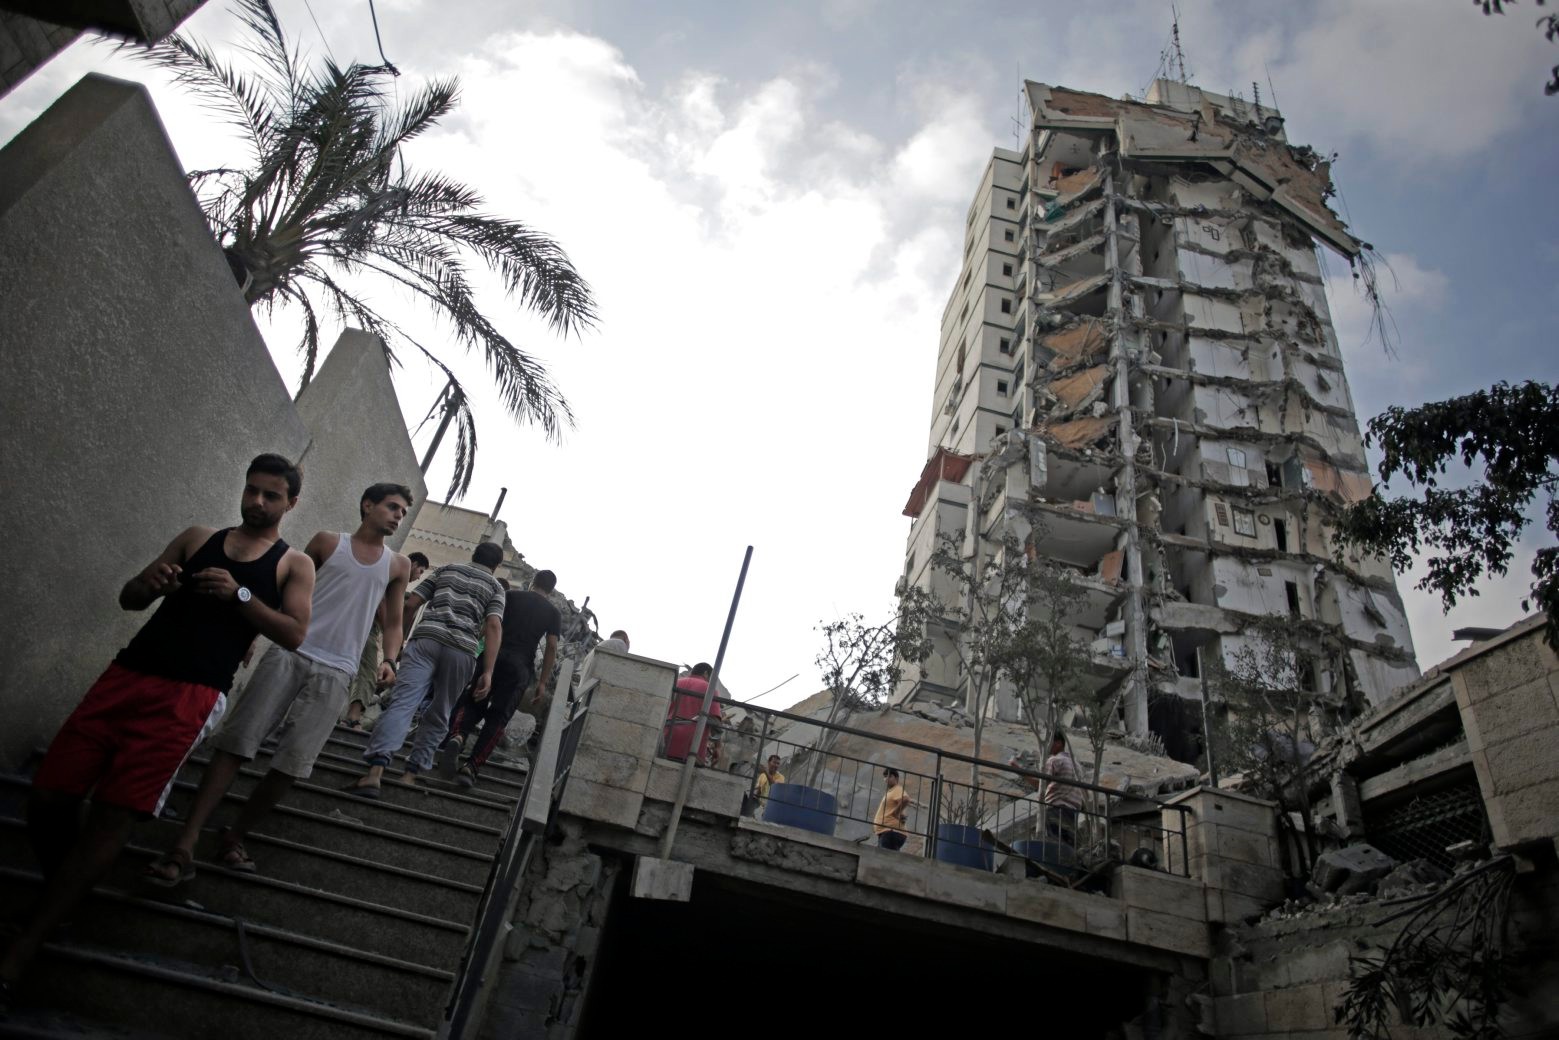 Palestinians walk near the damaged Italian Complex high-rise following several late night Israeli airstrikes in Gaza City, Tuesday, Aug. 26, 2014. Israel bombed two Gaza City high-rises with dozens of homes and shops Tuesday, collapsing the 15-story Basha Tower and severely damaging the Italian Complex in a further escalation in seven weeks of cross-border fighting with Hamas. (AP Photo/Khalil Hamra) Mideast Israel Palestinians